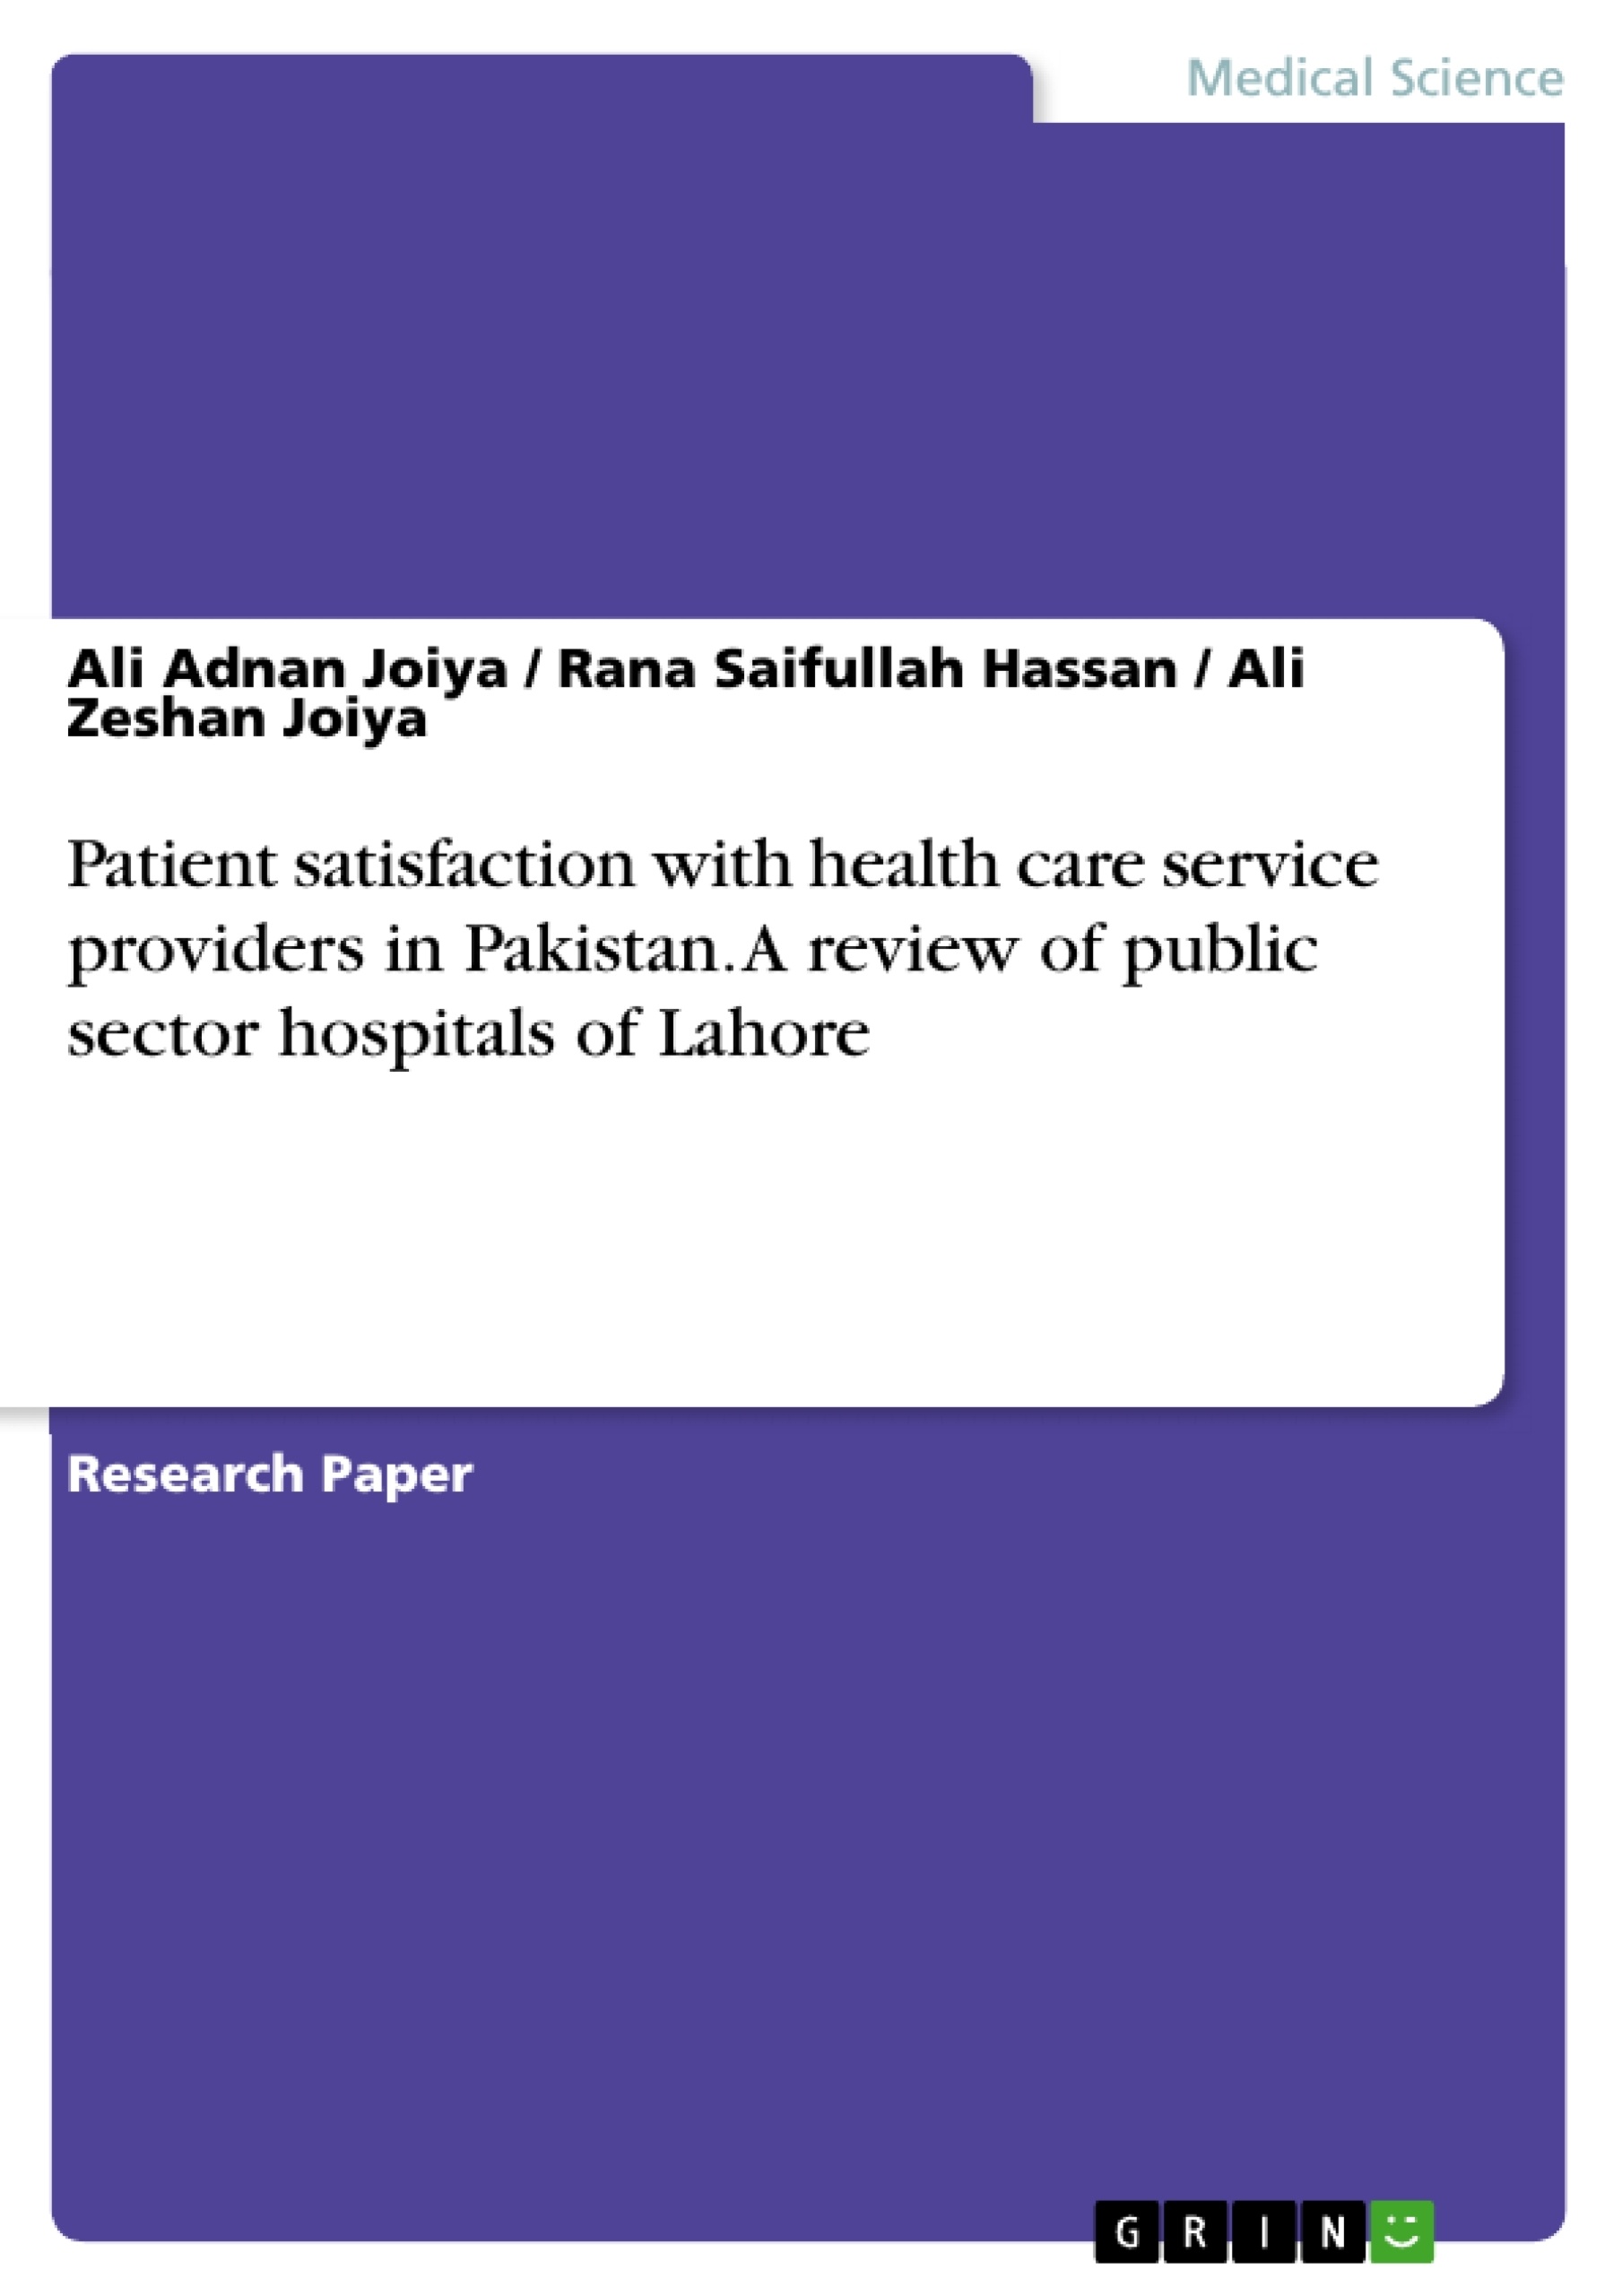 Título: Patient satisfaction with health care service providers in Pakistan. A review of public sector hospitals of Lahore